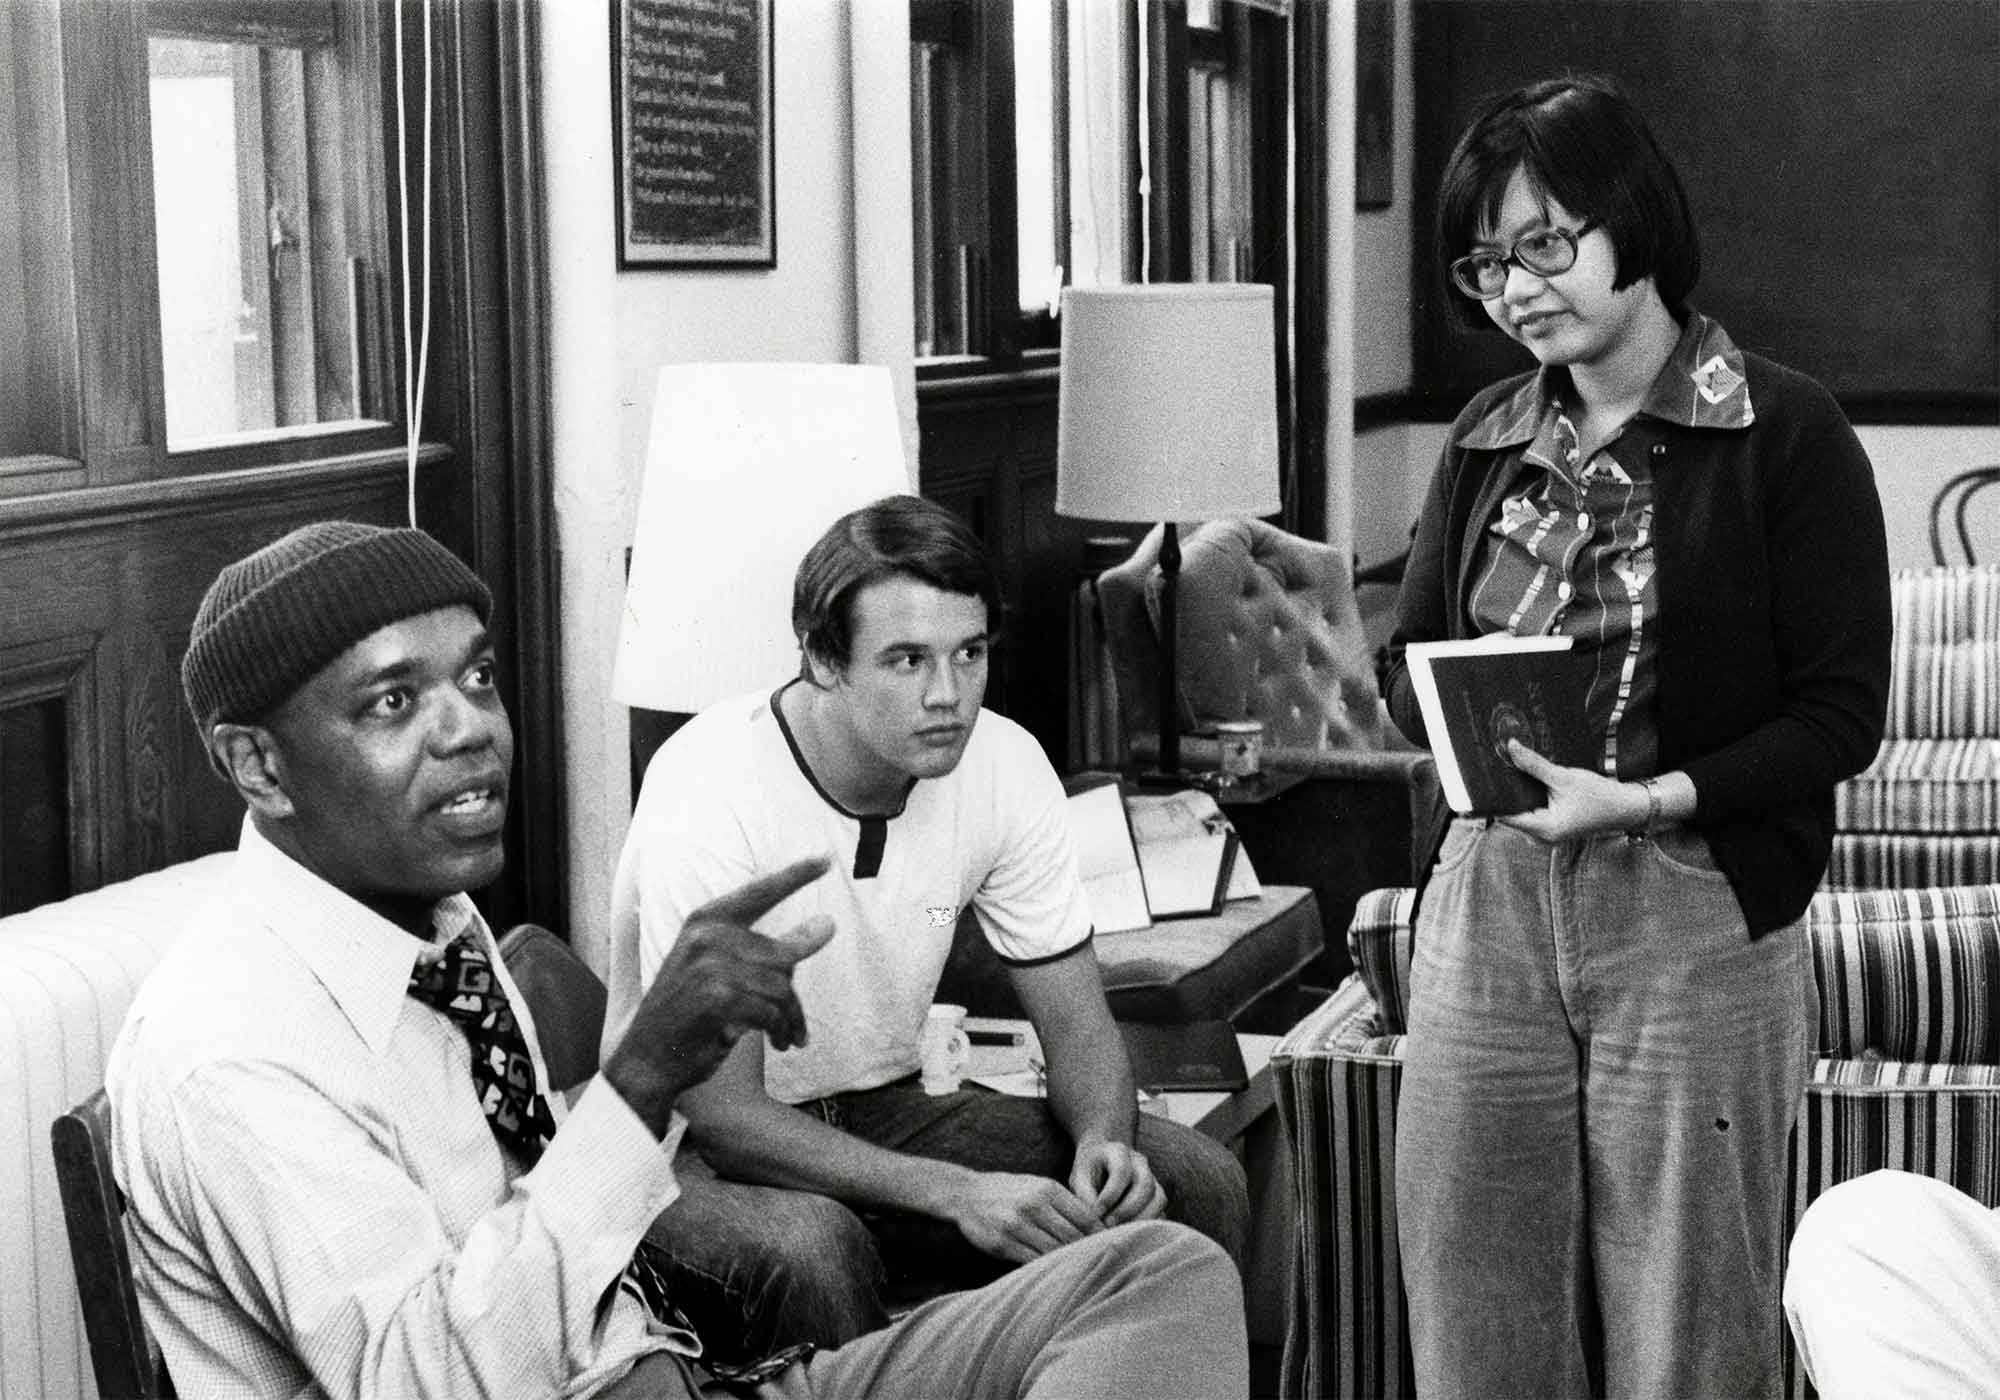 A black and white photograph three people in a room with furniture and lamps visible in the background. The person on the left is wearing a knit cap, a white shirt with a collar, and a patterned tie. The person is speaking with finger up. The middle person has short dark hair, a white shirt, and is looking away. The rightmost person is standing, has shoulder-length dark hair and glasses, and is looking at the speaker and holding a book.